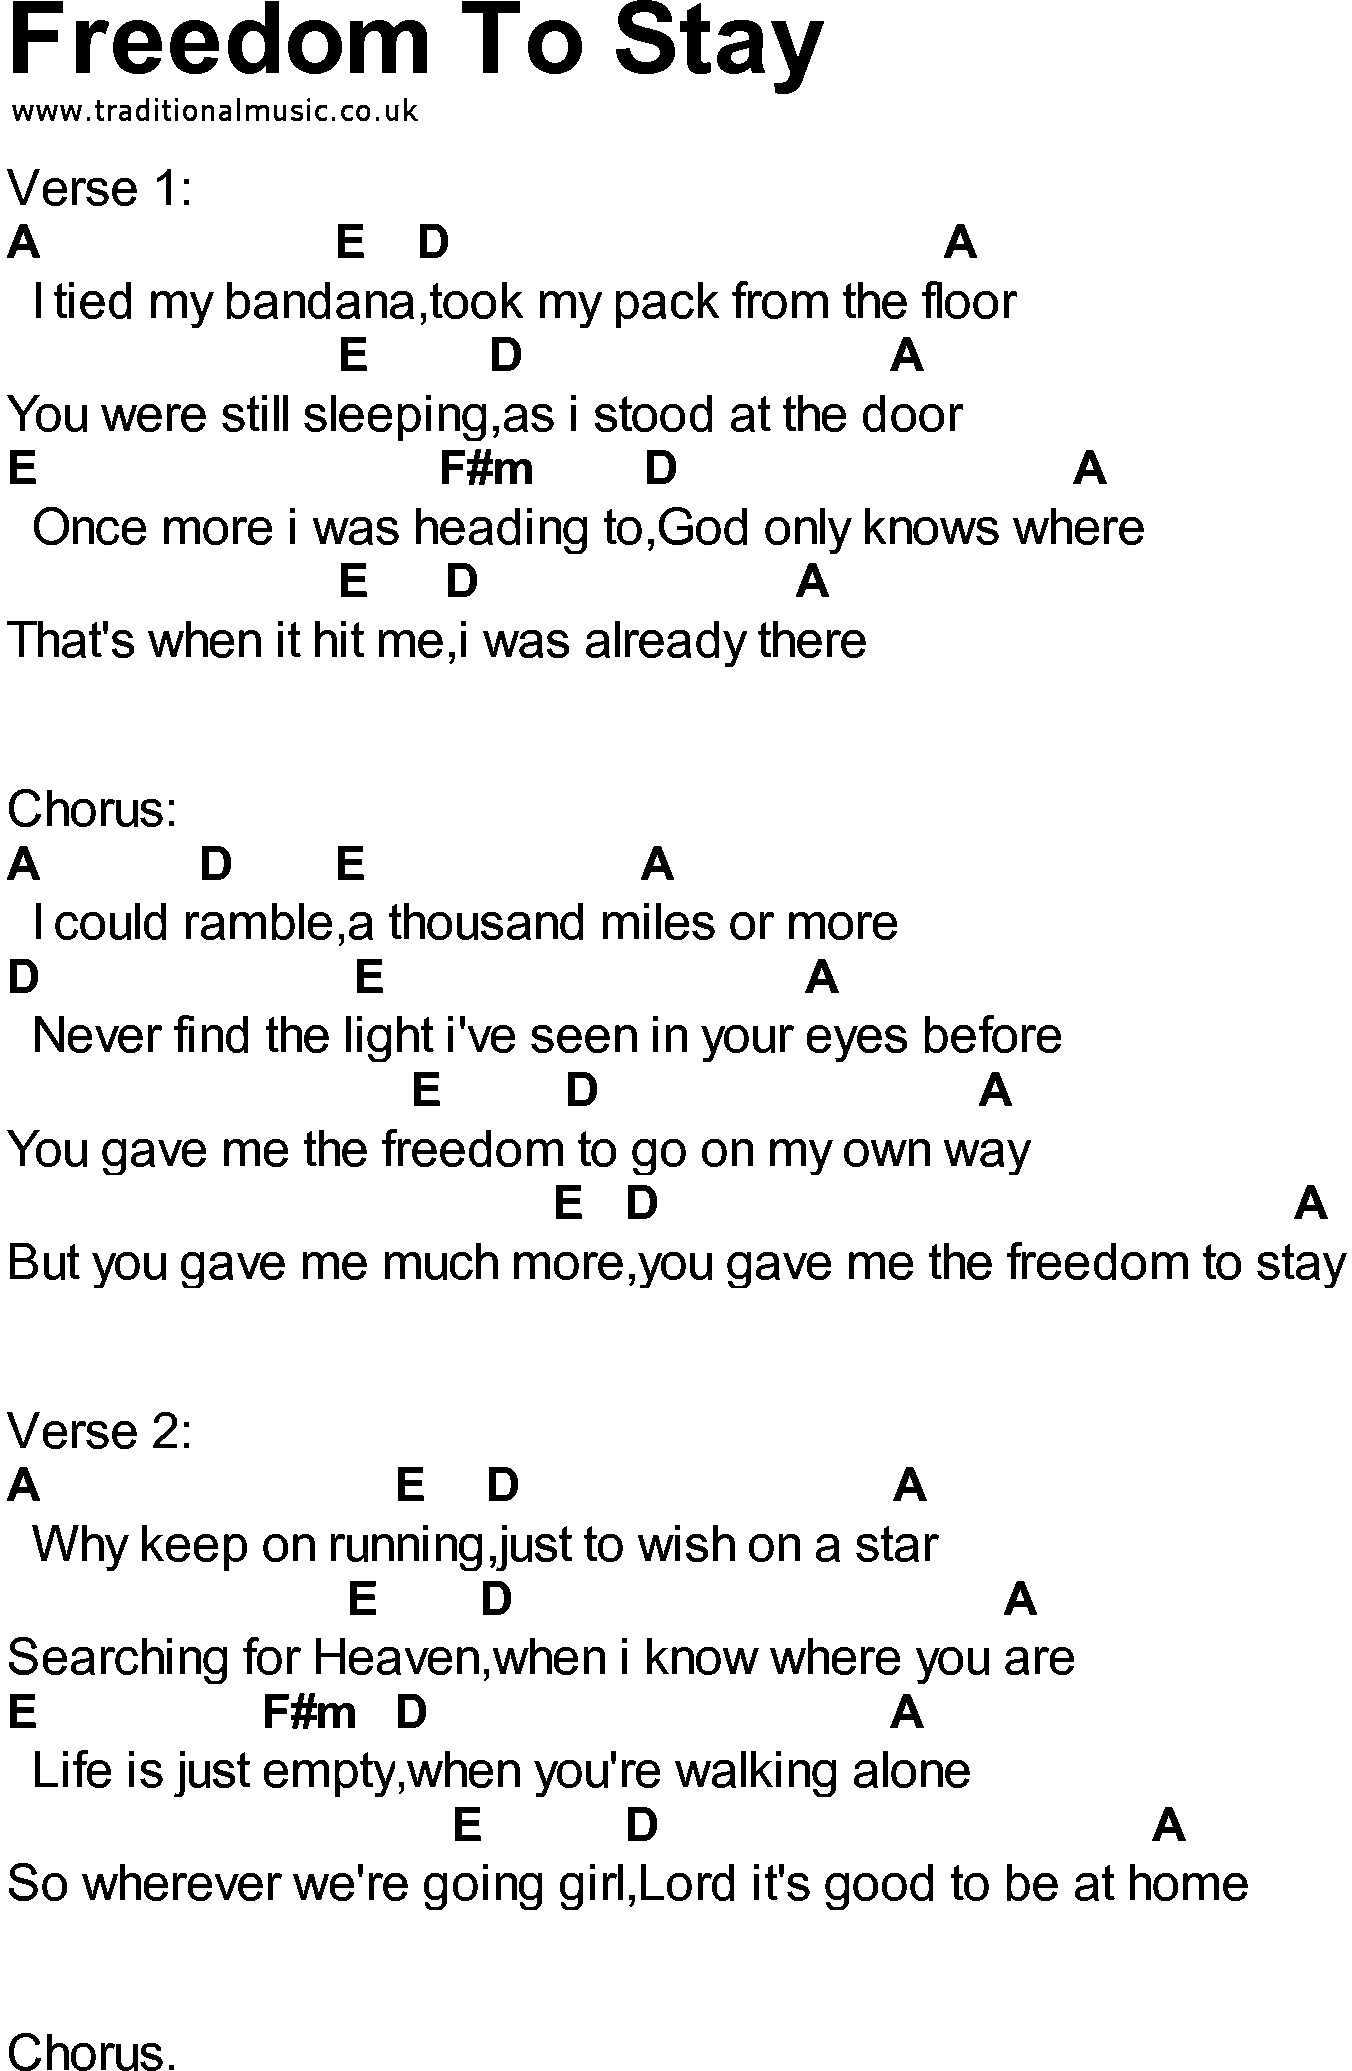 Bluegrass songs with chords - Freedom To Stay